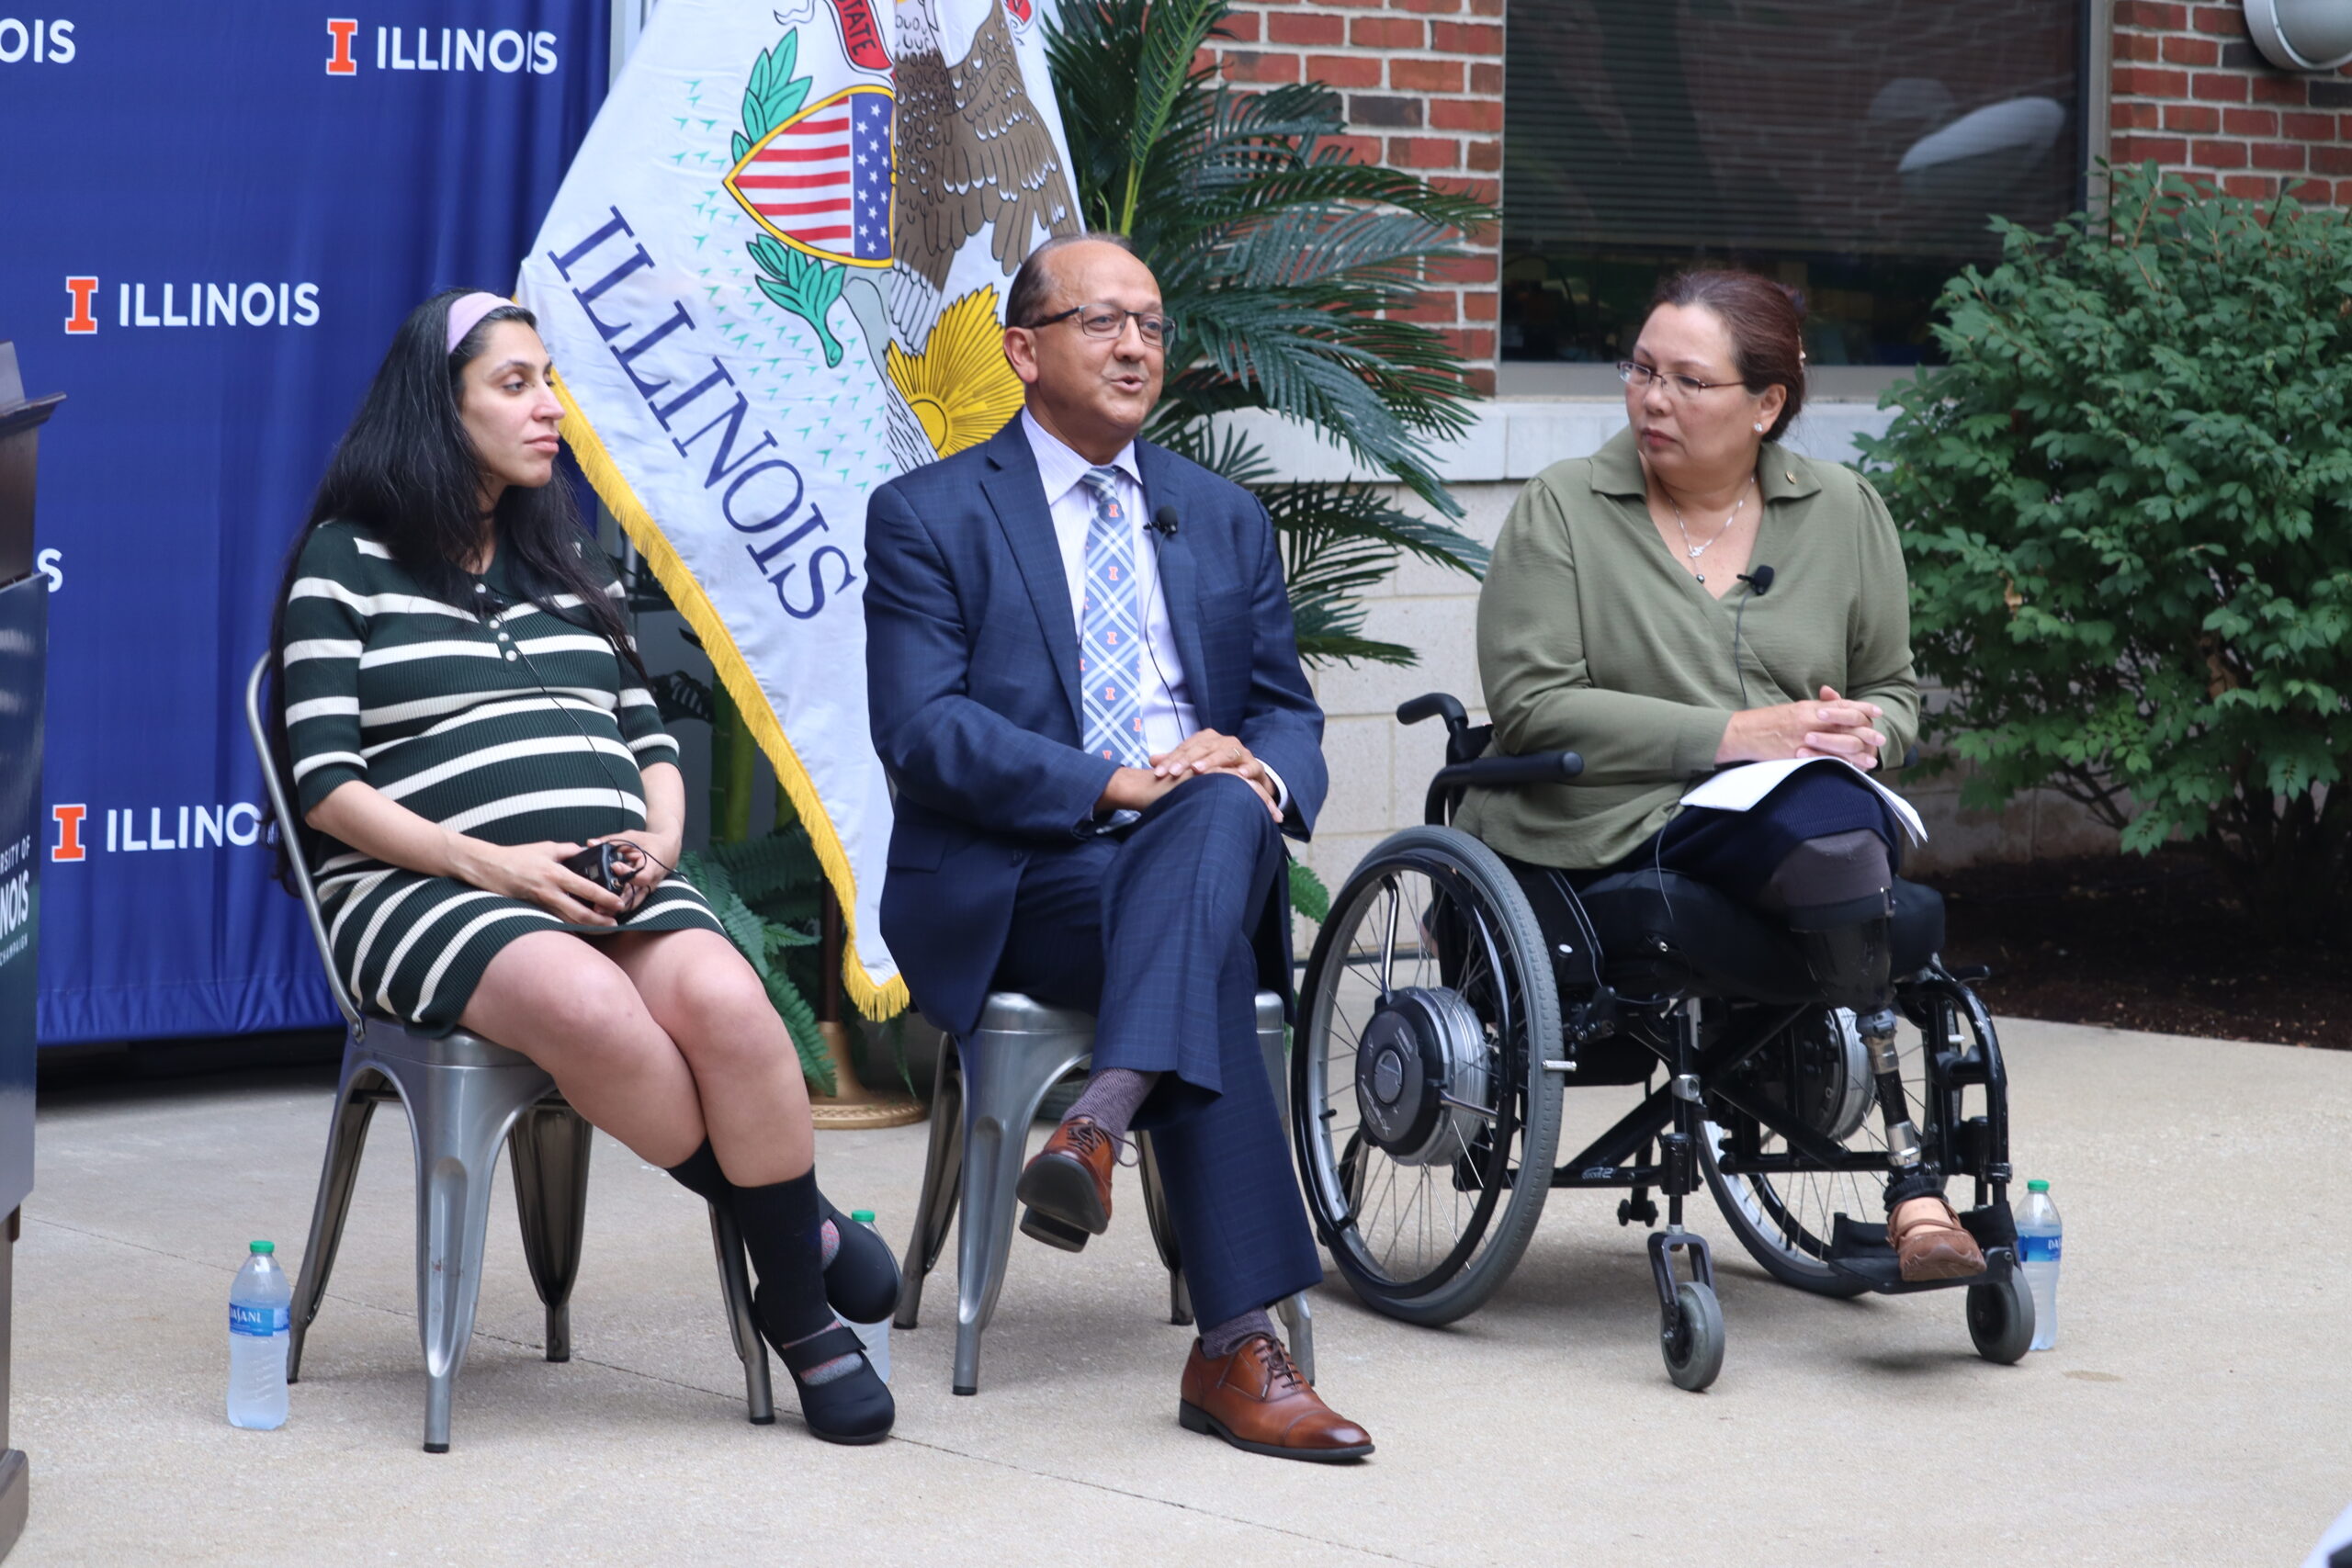 Sen. Tammy Duckworth Highlights Efforts to Promote Illinois Innovation at Research Park Visit 2 Sen. Tammy Duckworth Highlights Efforts to Promote Illinois Innovation at Research Park Visit